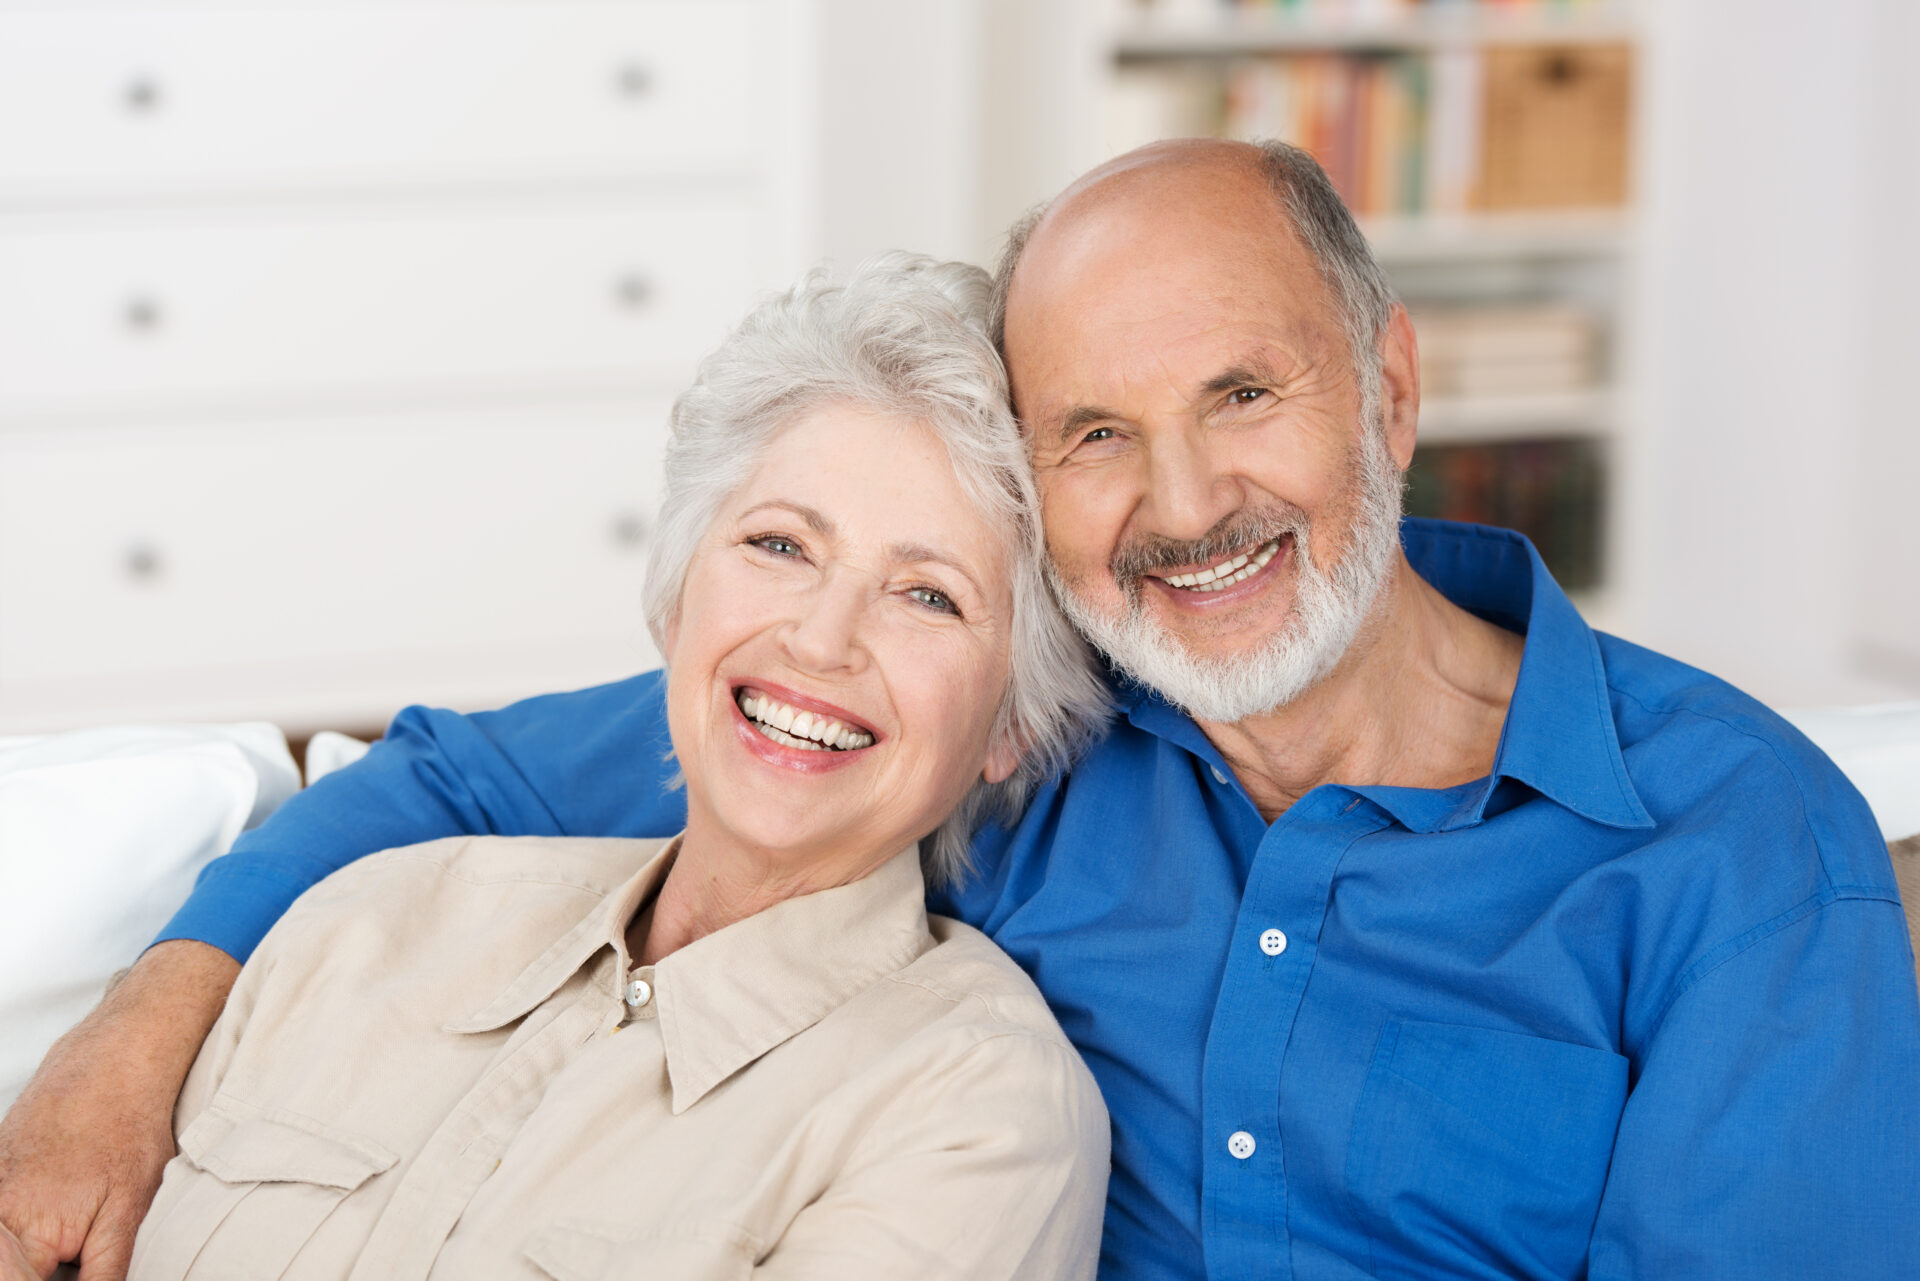 Romantic senior couple sitting close together on a sofa in the house smiling happily at the camera